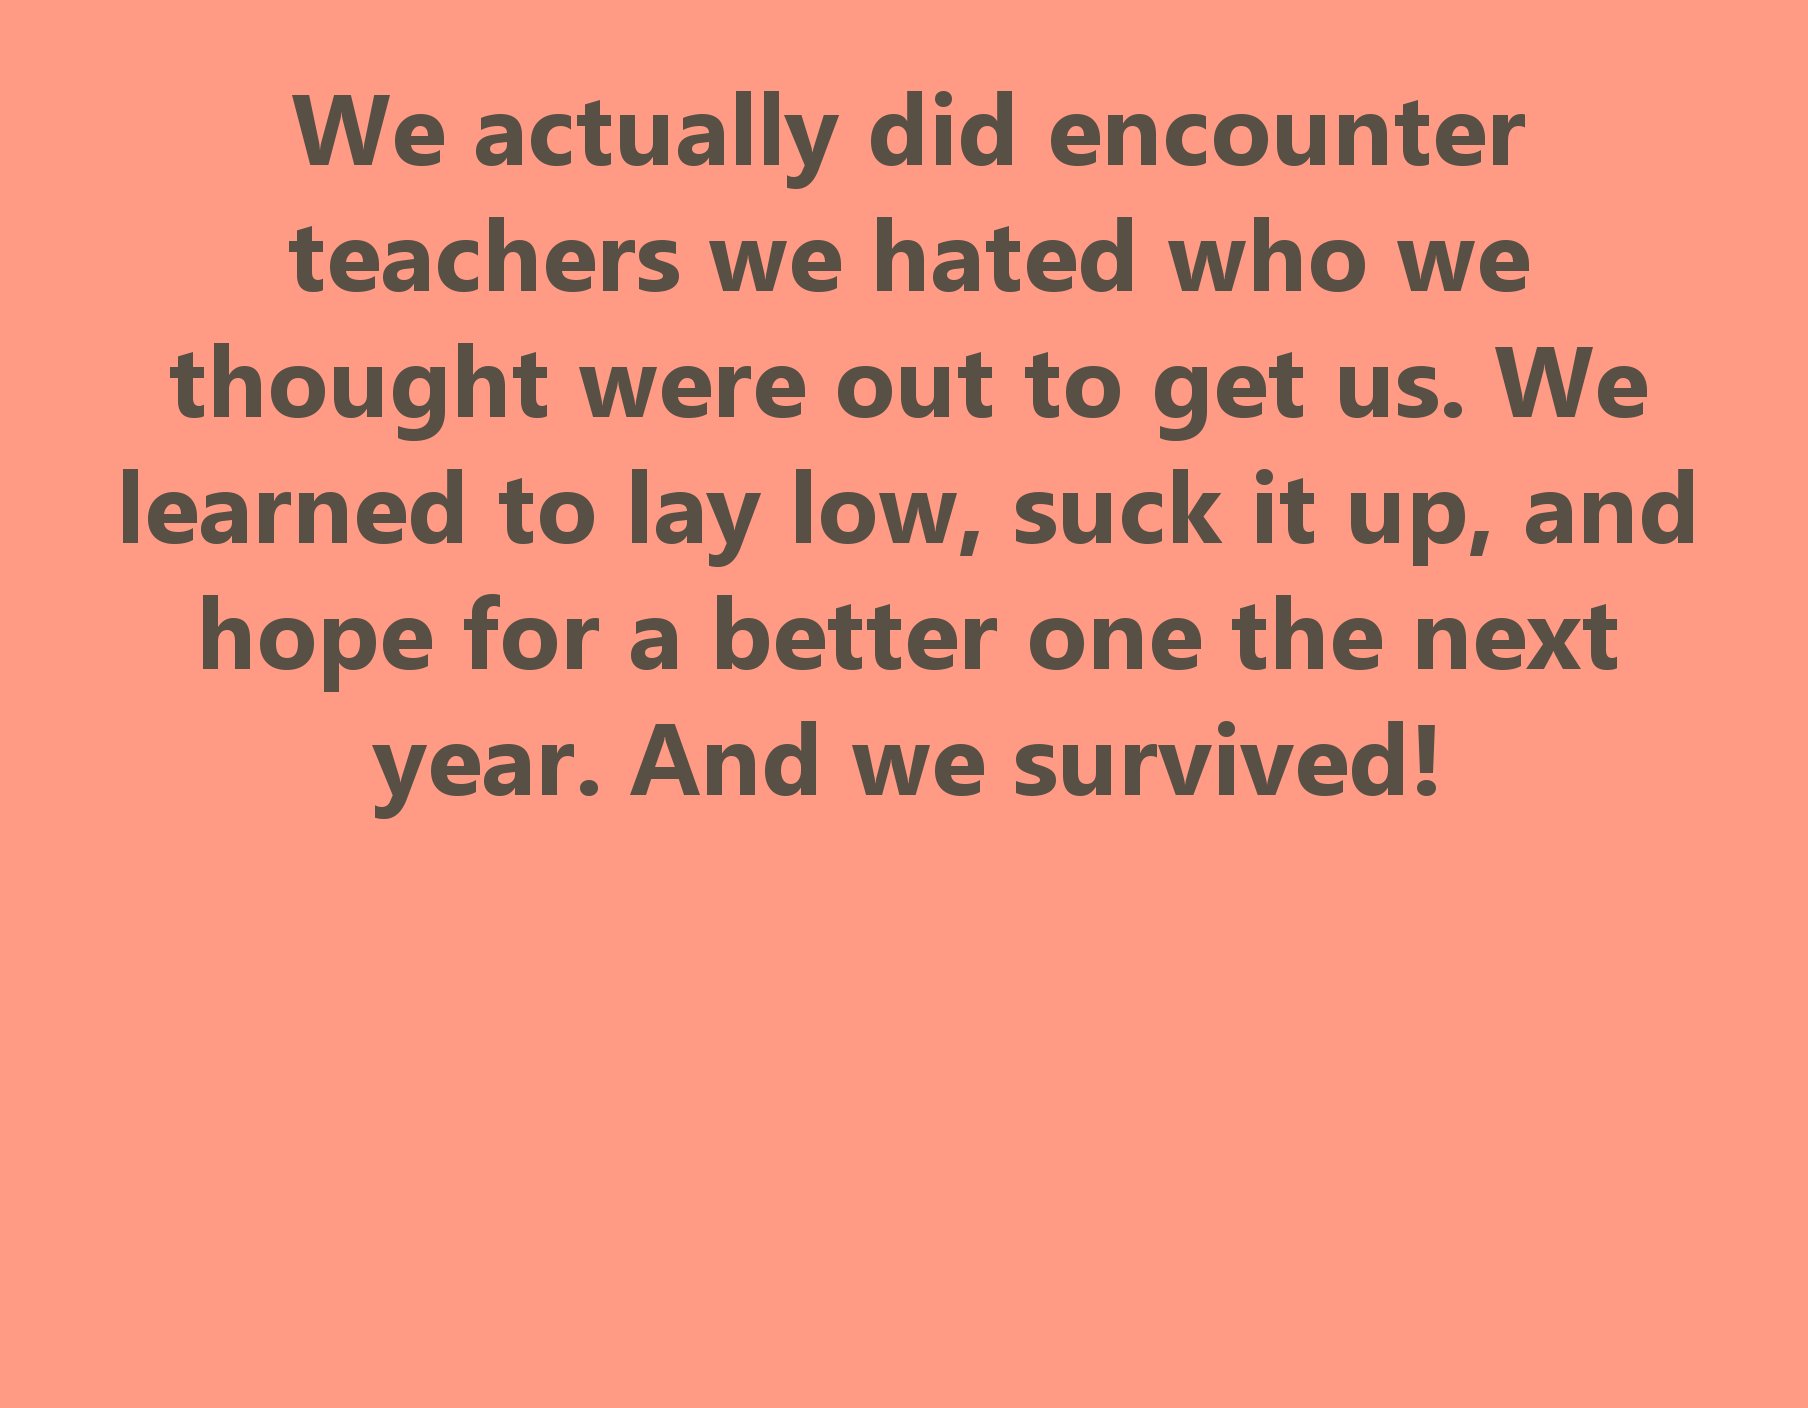 walmart - We actually did encounter teachers we hated who we thought were out to get us. We learned to lay low, suck it up, and hope for a better one the next year. And we survived!